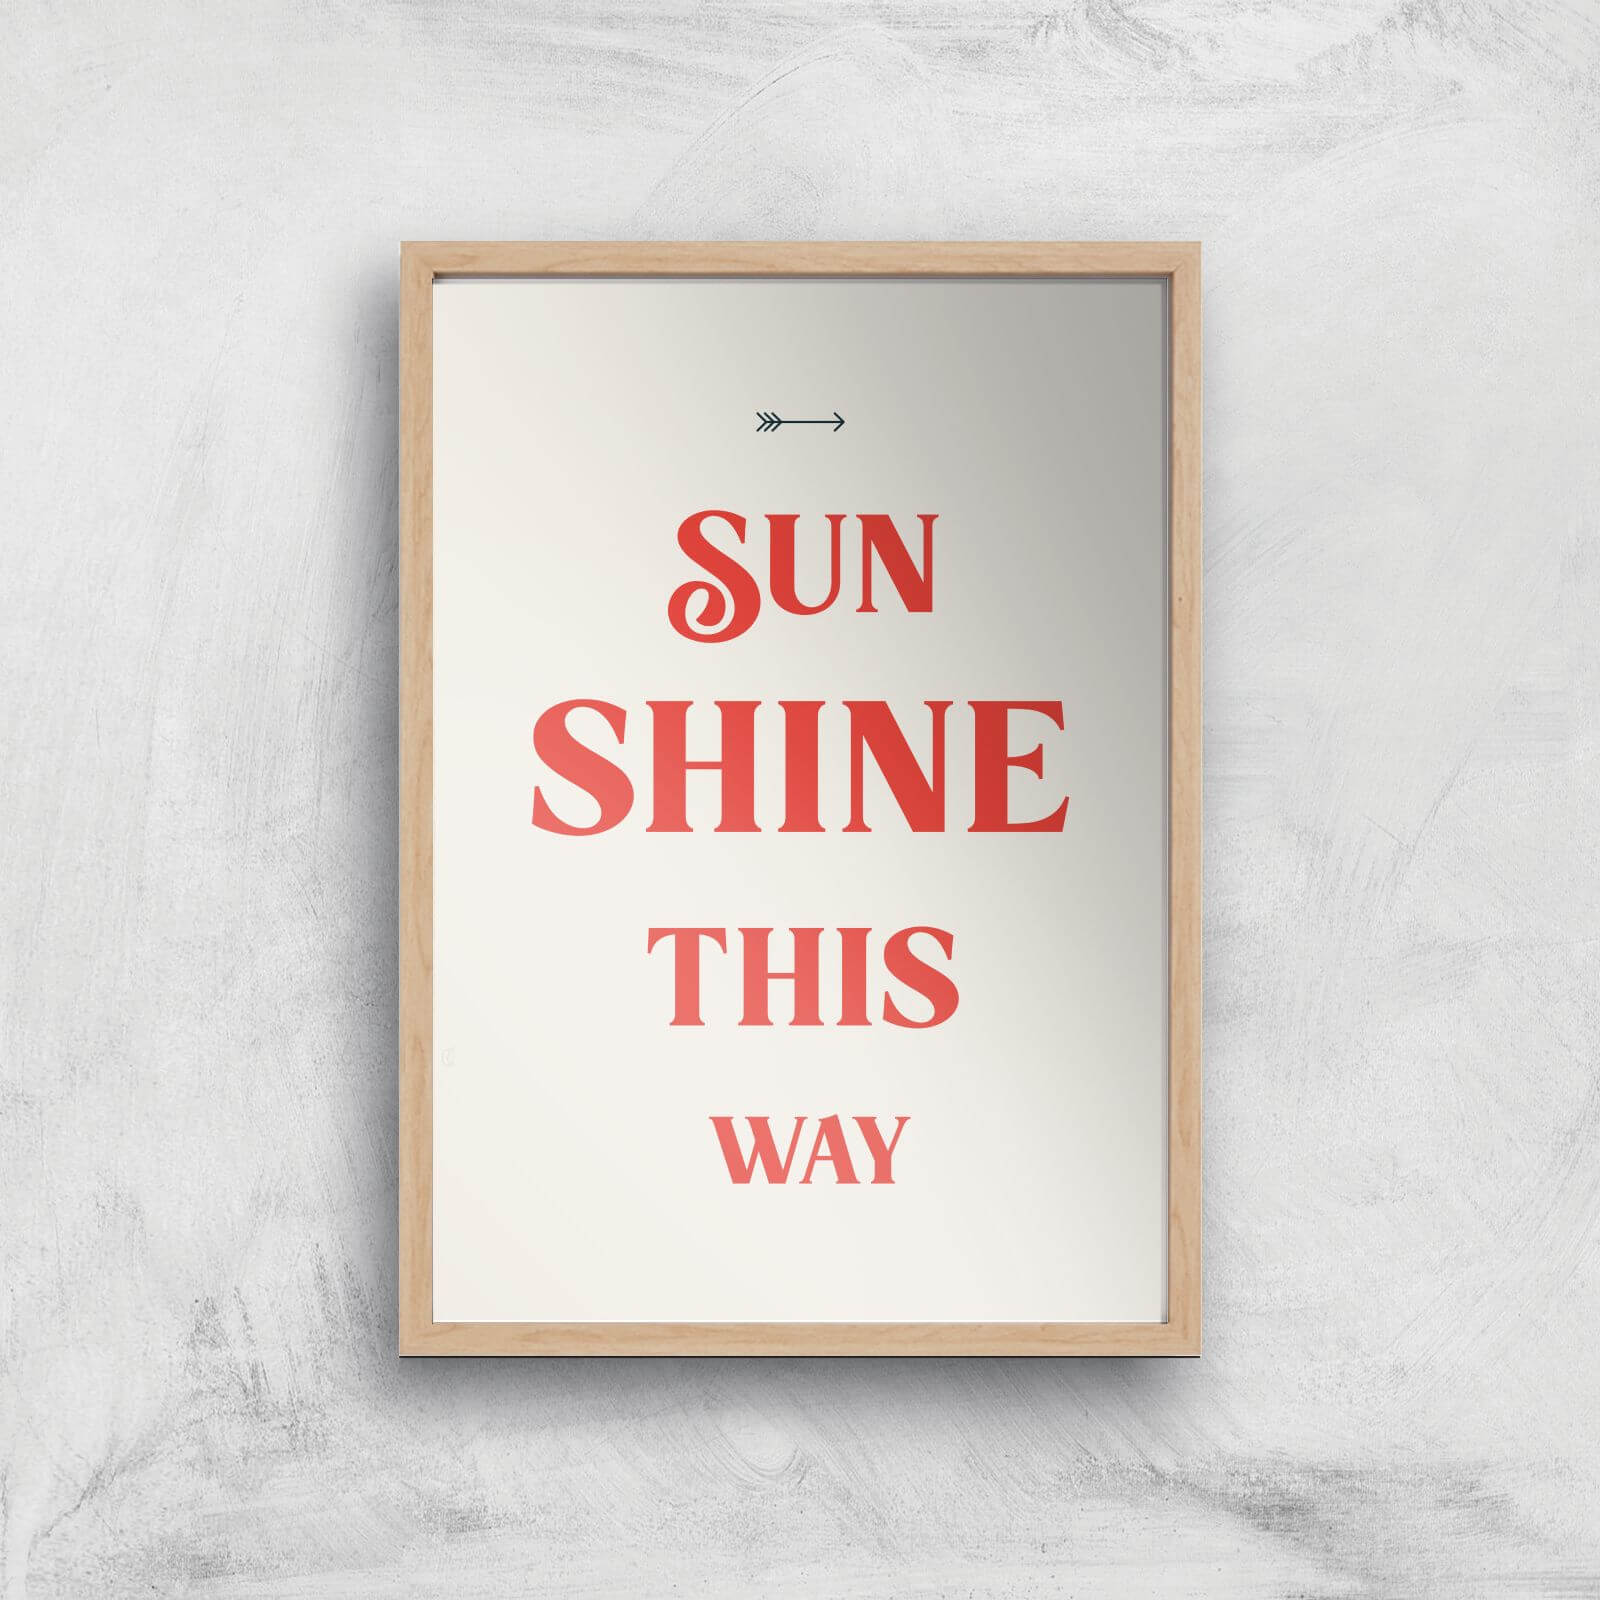 Hermione Chantal Sunshine This Way Giclee Art Print - A4 - Wooden Frame